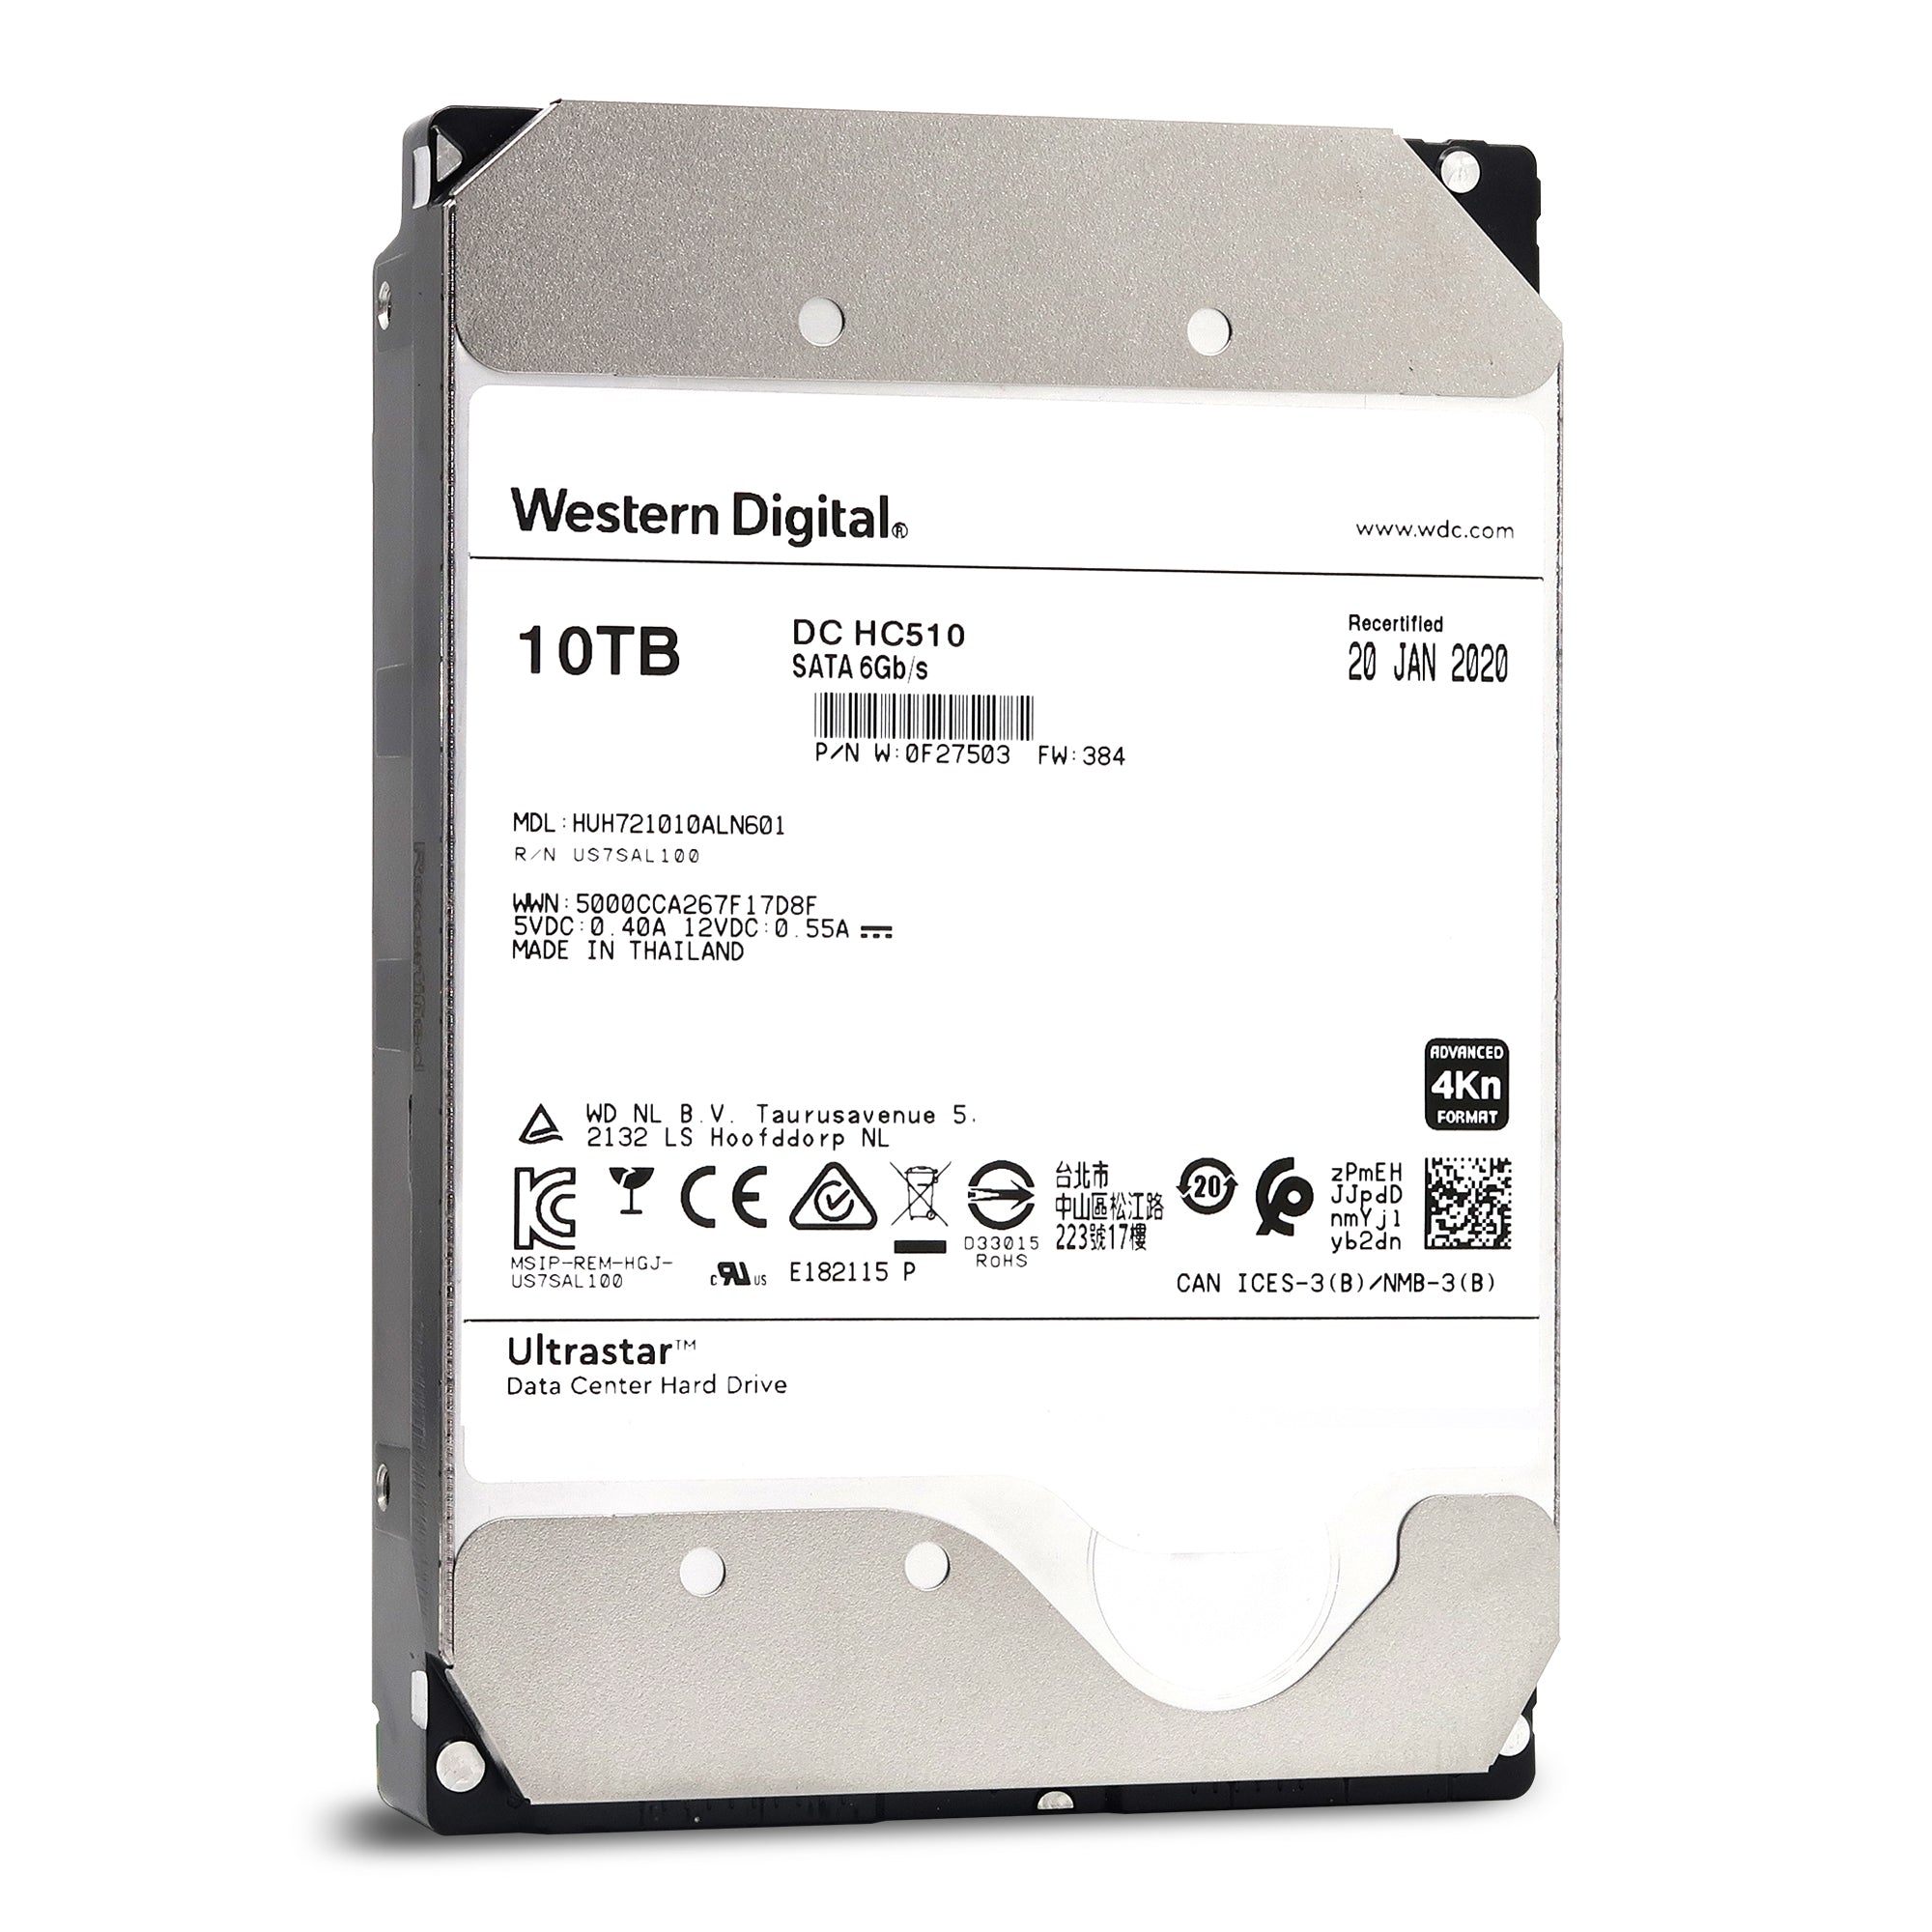 WD / HGST Ultrastar He10 / HC510 HUH721010ALN601 0F27503 10TB 7.2K RPM SATA 6Gb/s 4Kn 256MB 3.5" SED Power Disable Pin Manufacturer Recertified HDD - Front View